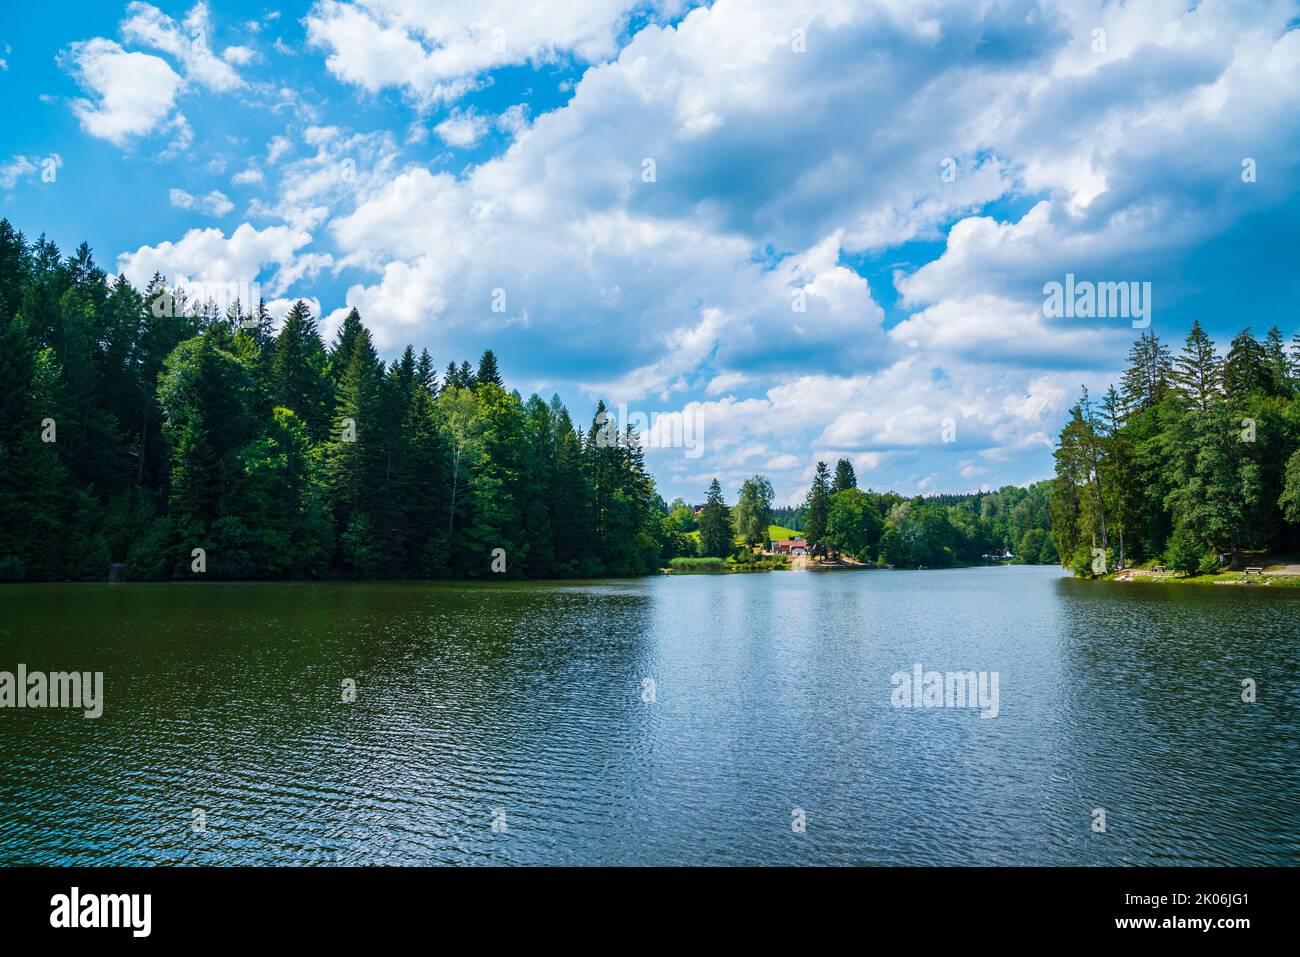 Germany, Ebnisee lake water nature landscape between green trees of forest near welzheim and kaisersbach Stock Photo